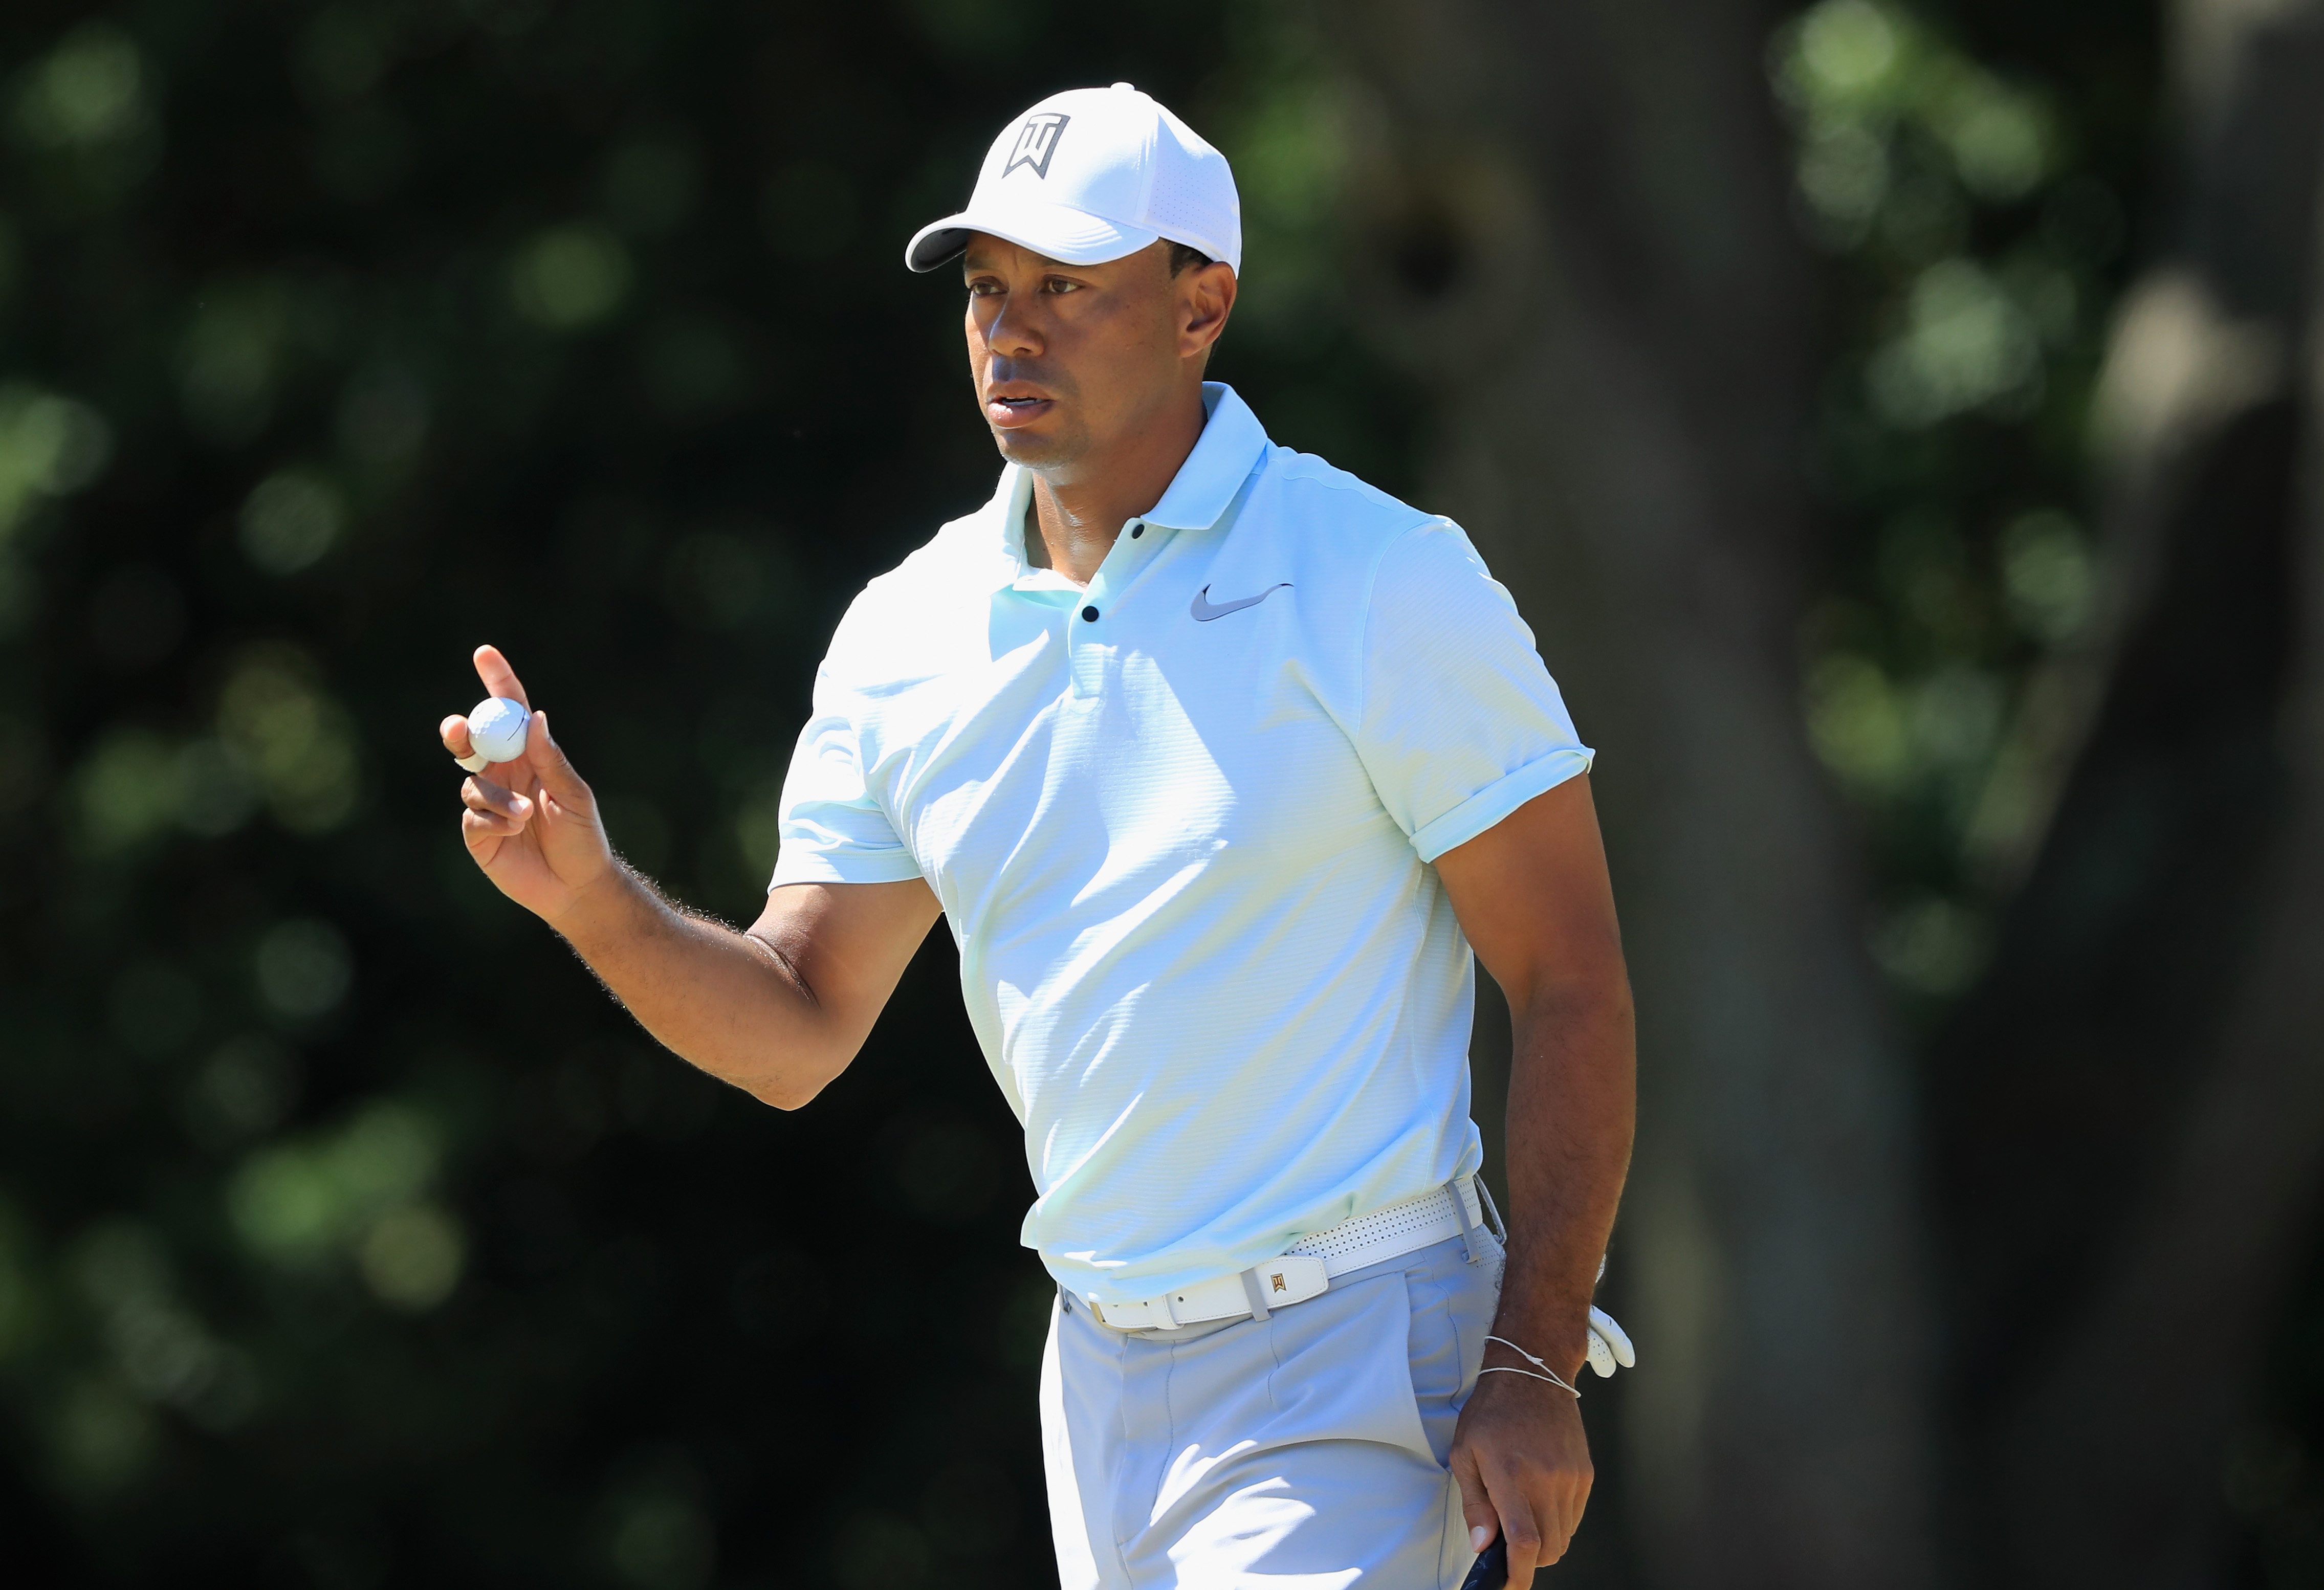 Stenson leads loaded board at Bay Hill, Woods five back